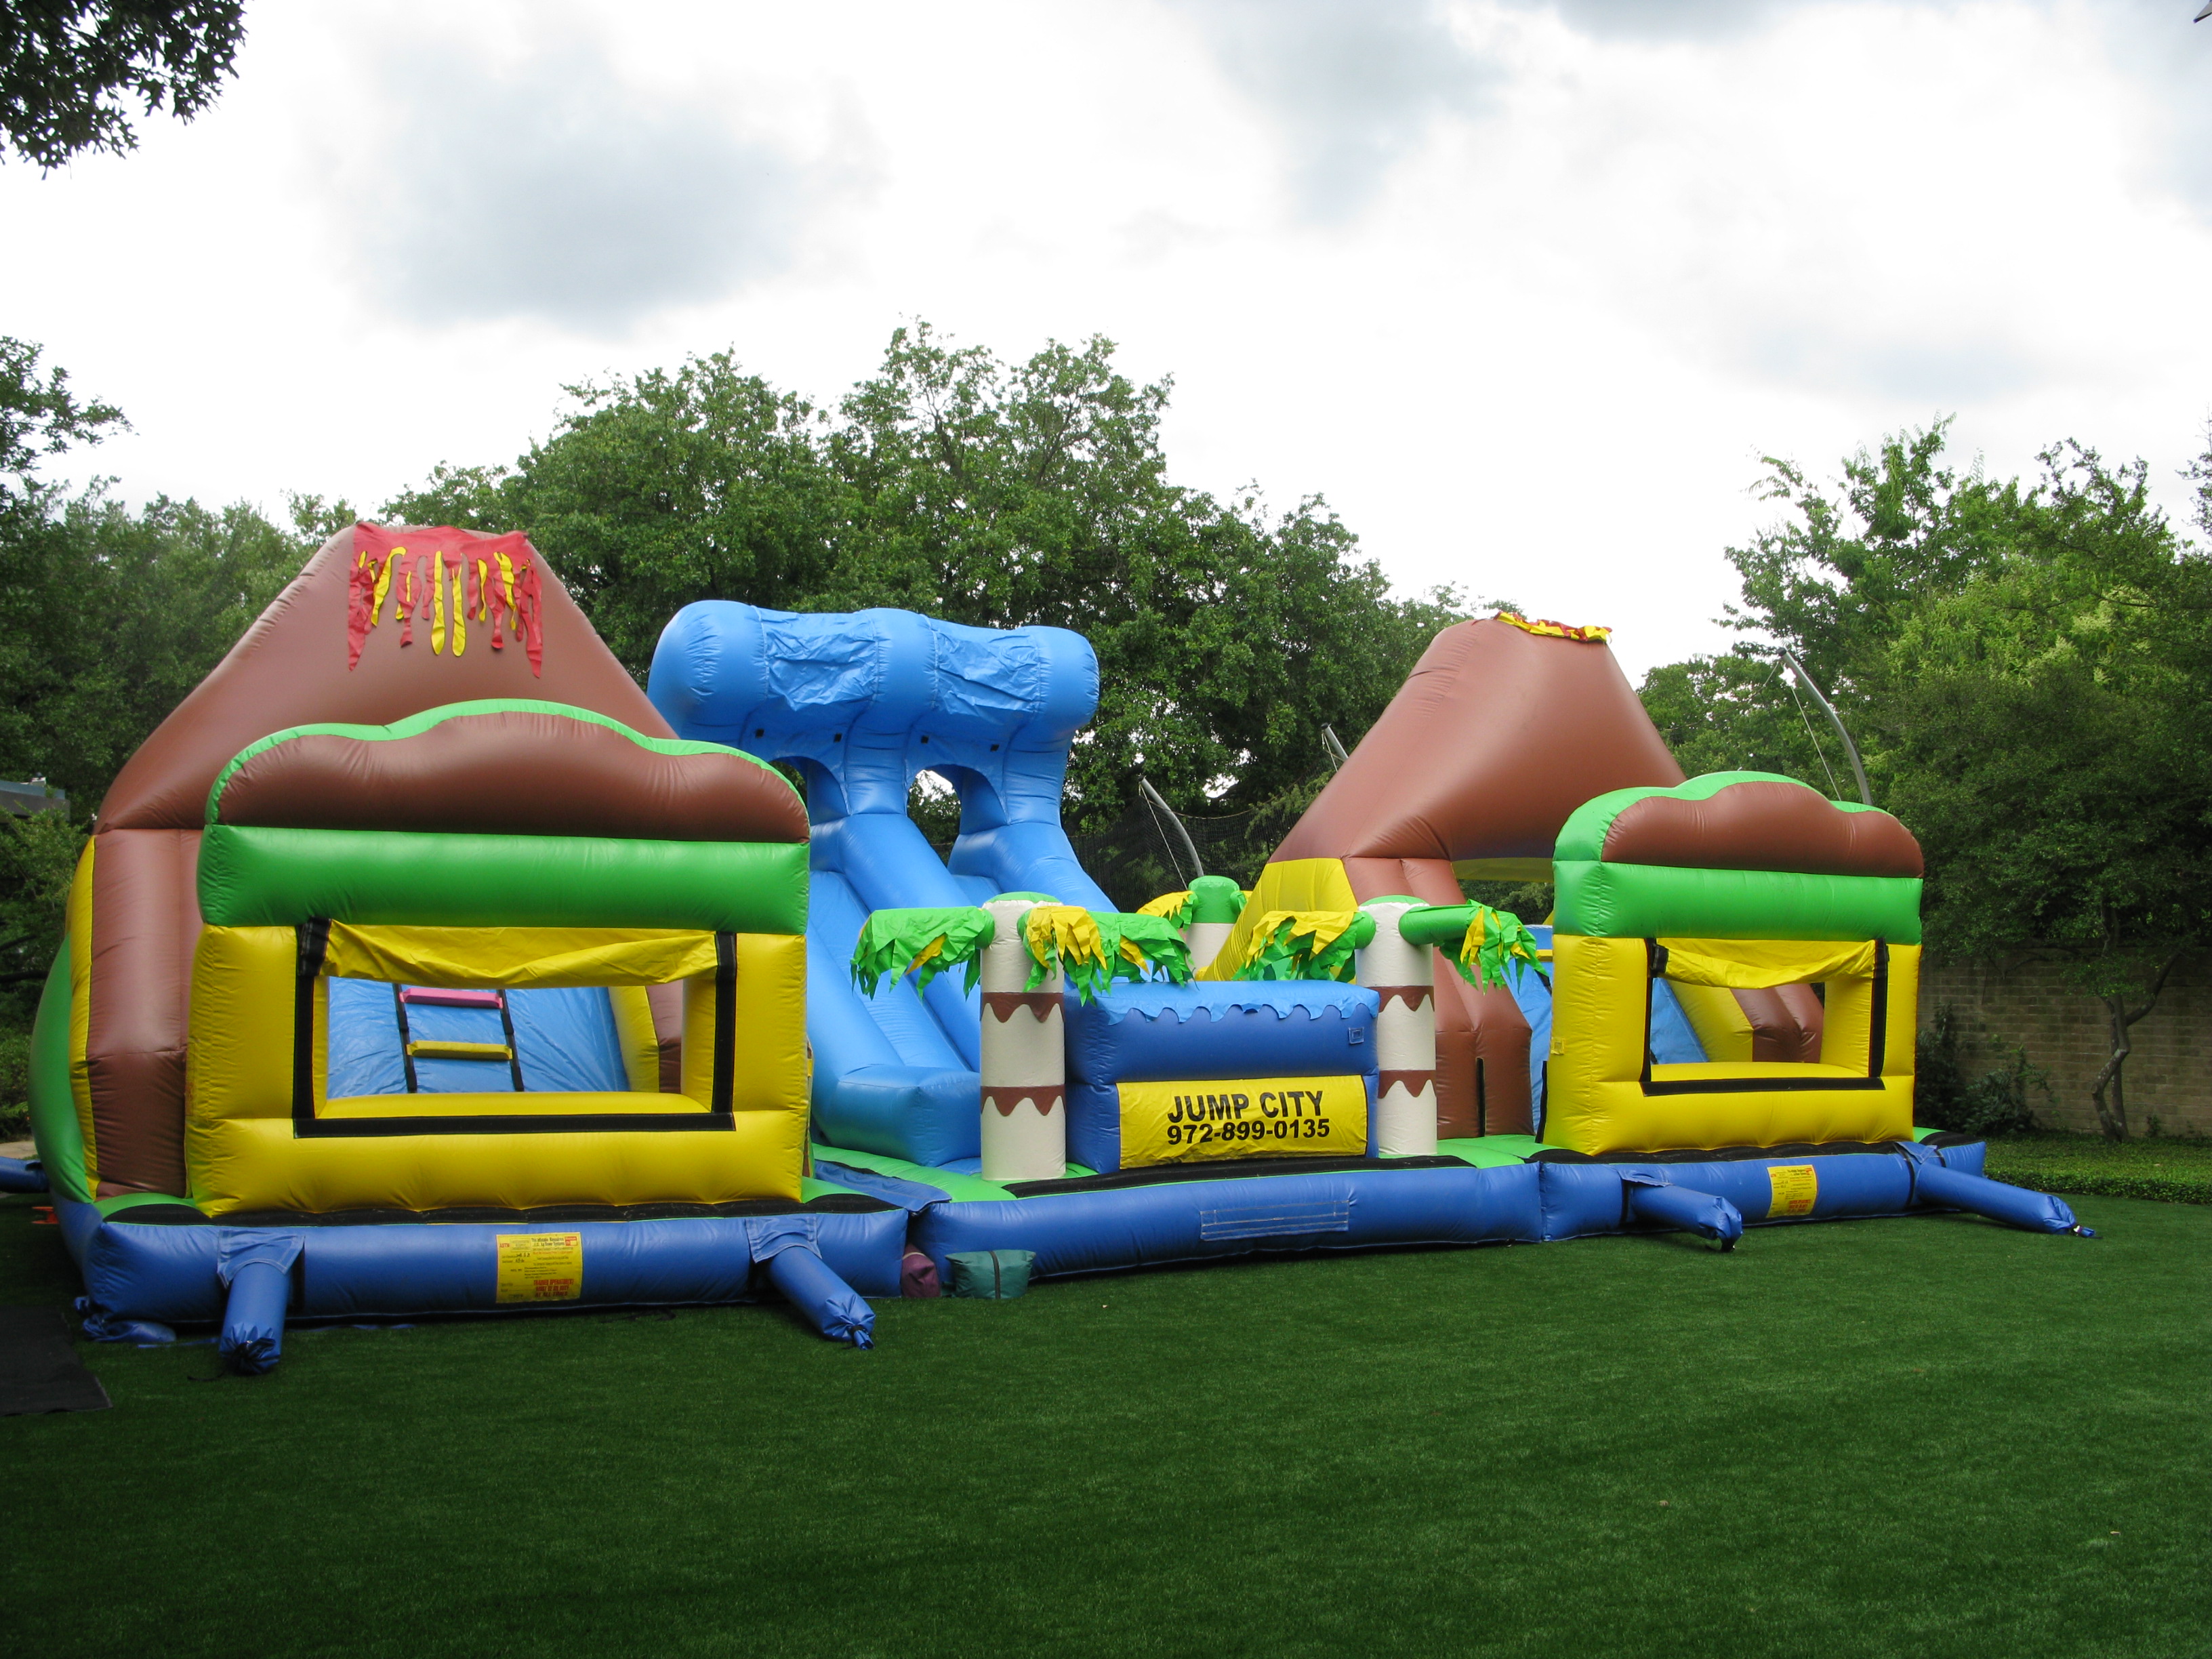 Obstacle Courses for rent Dallas TX. obstacle course rentals Dallas, Flower Mound, Colleyville, TX